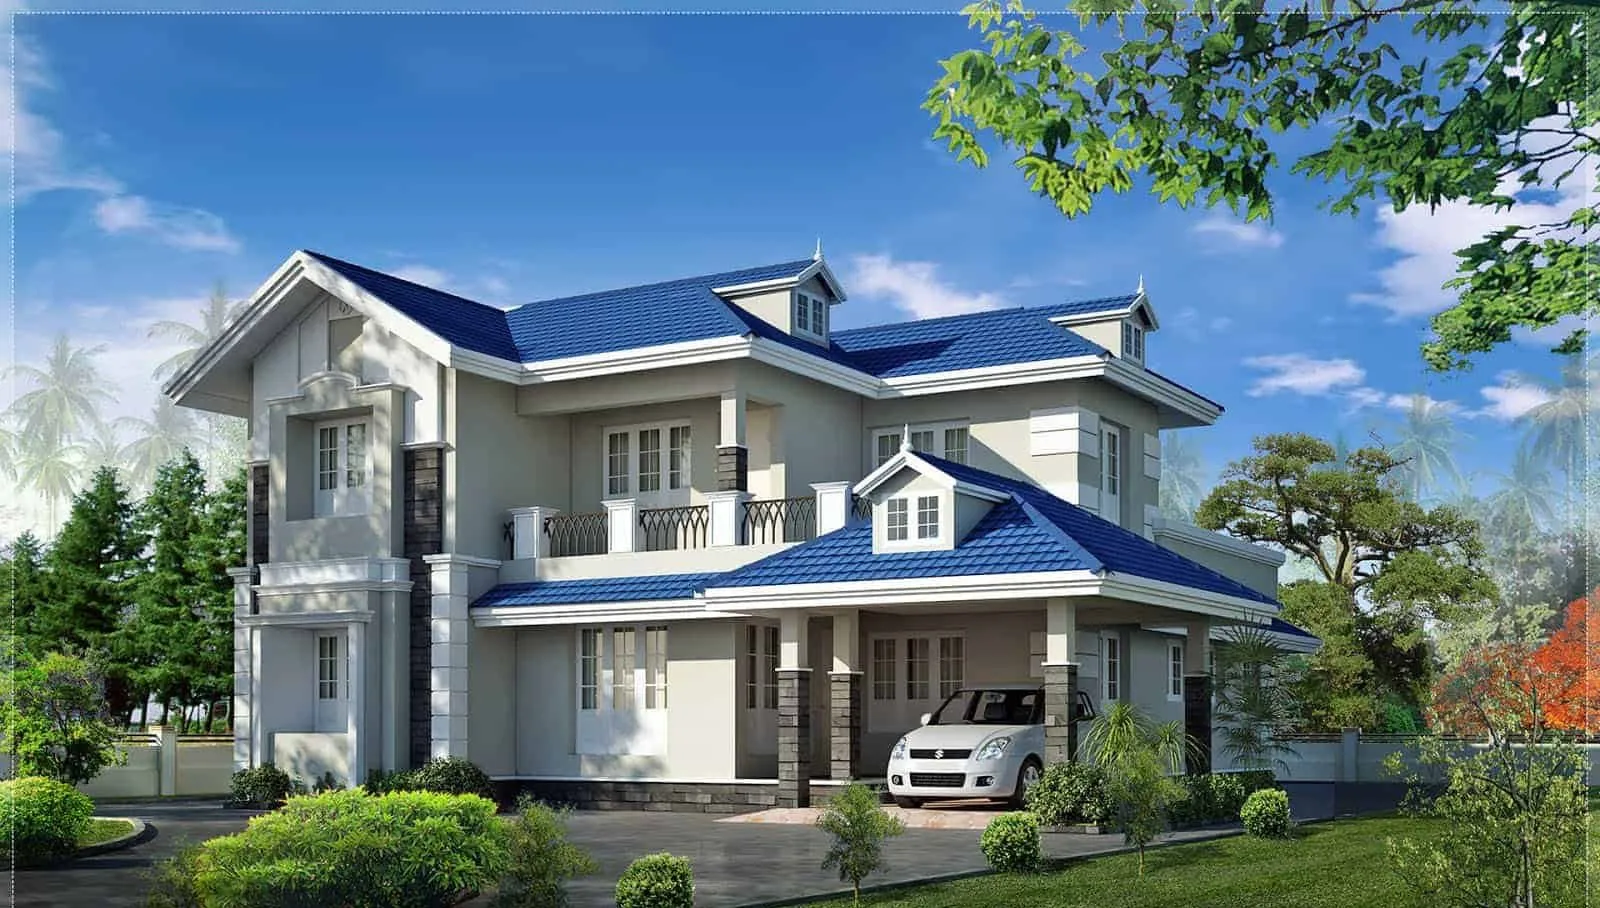 lovely blue and white two storey house design